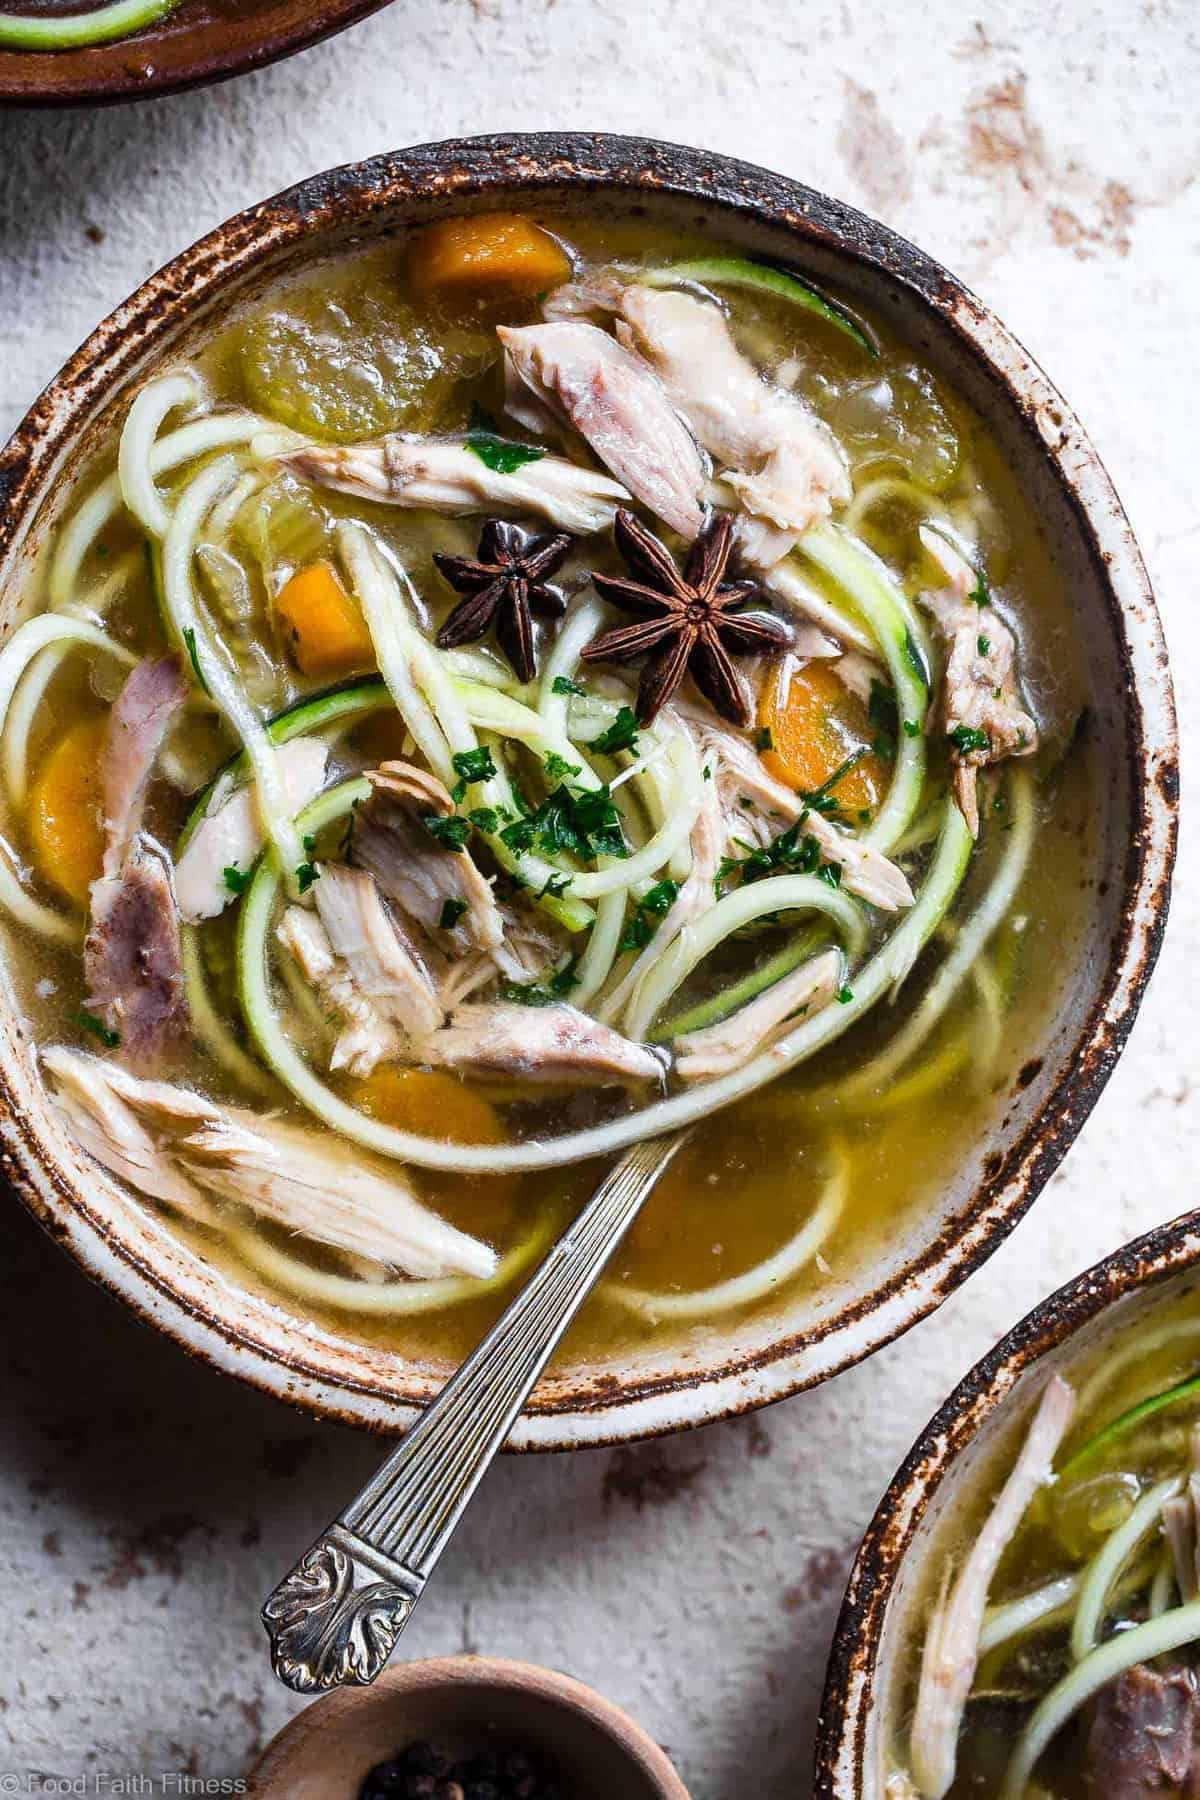 Low carb Chicken Zoodle Soup - This easy homemade healthy keto Chicken Zoodle Soup uses zucchini noodles so it's gluten free, low carb, paleo, whole30 AND packed with protein! You won't miss the noodles! | #Foodfaithfitness | #Glutenfree #Lowcarb #Keto #Whole30 #Paleo